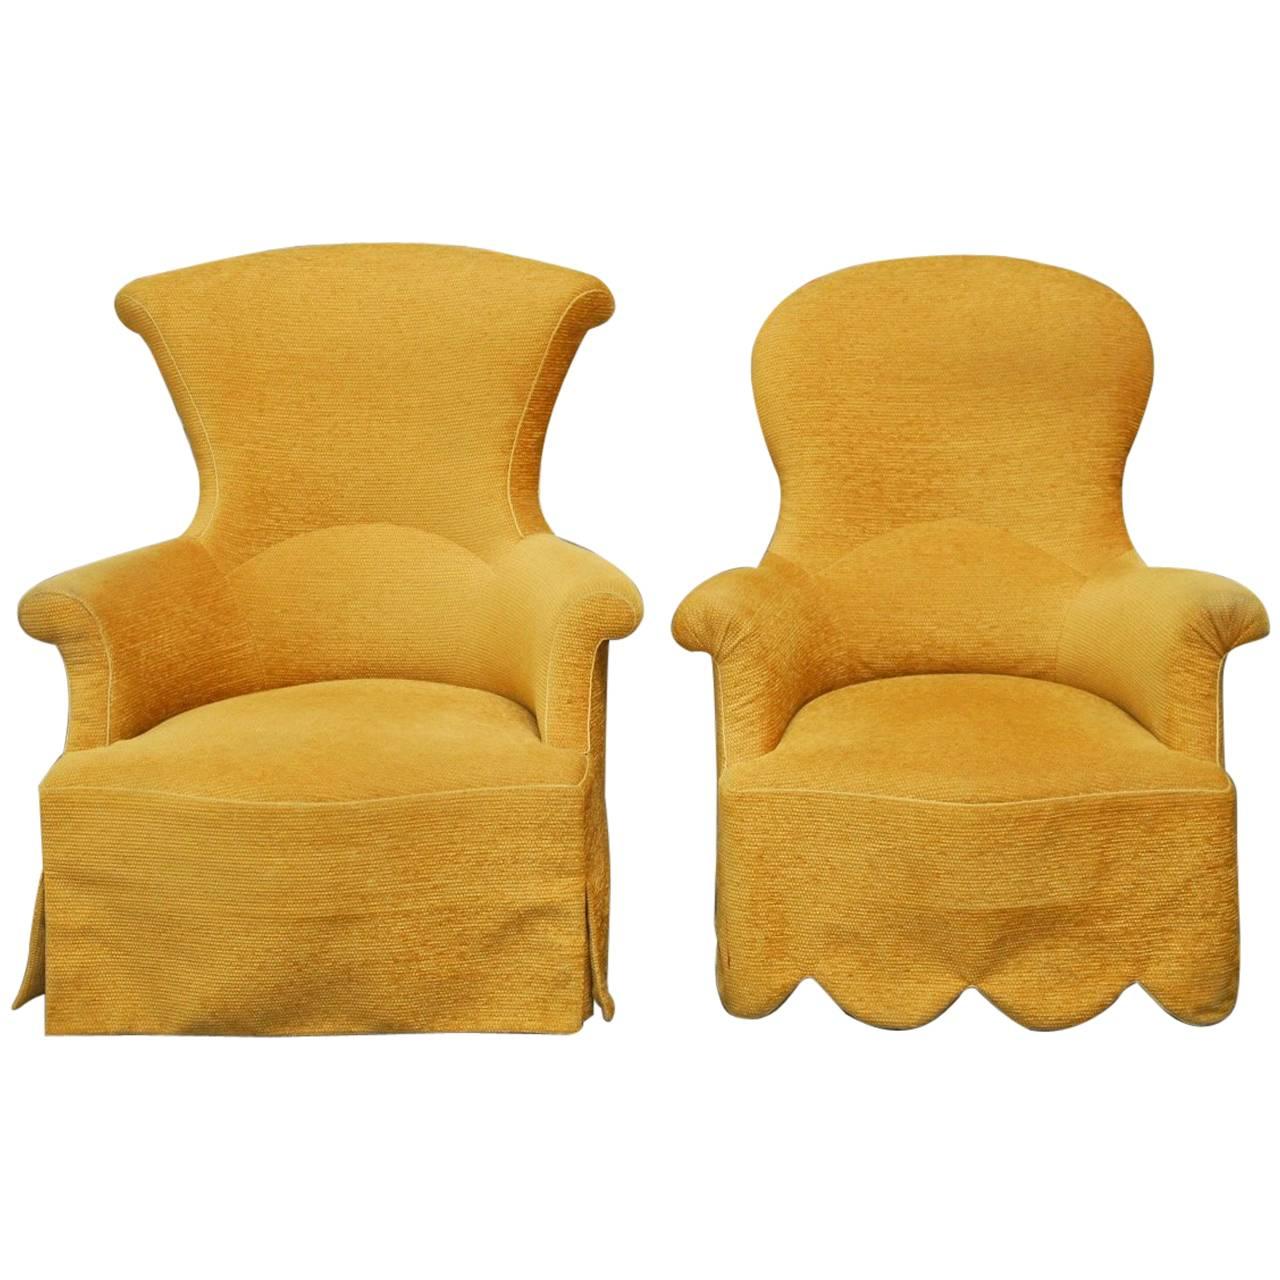 Pair of His and Hers Upholstered Armchairs by Rose Tarlow 